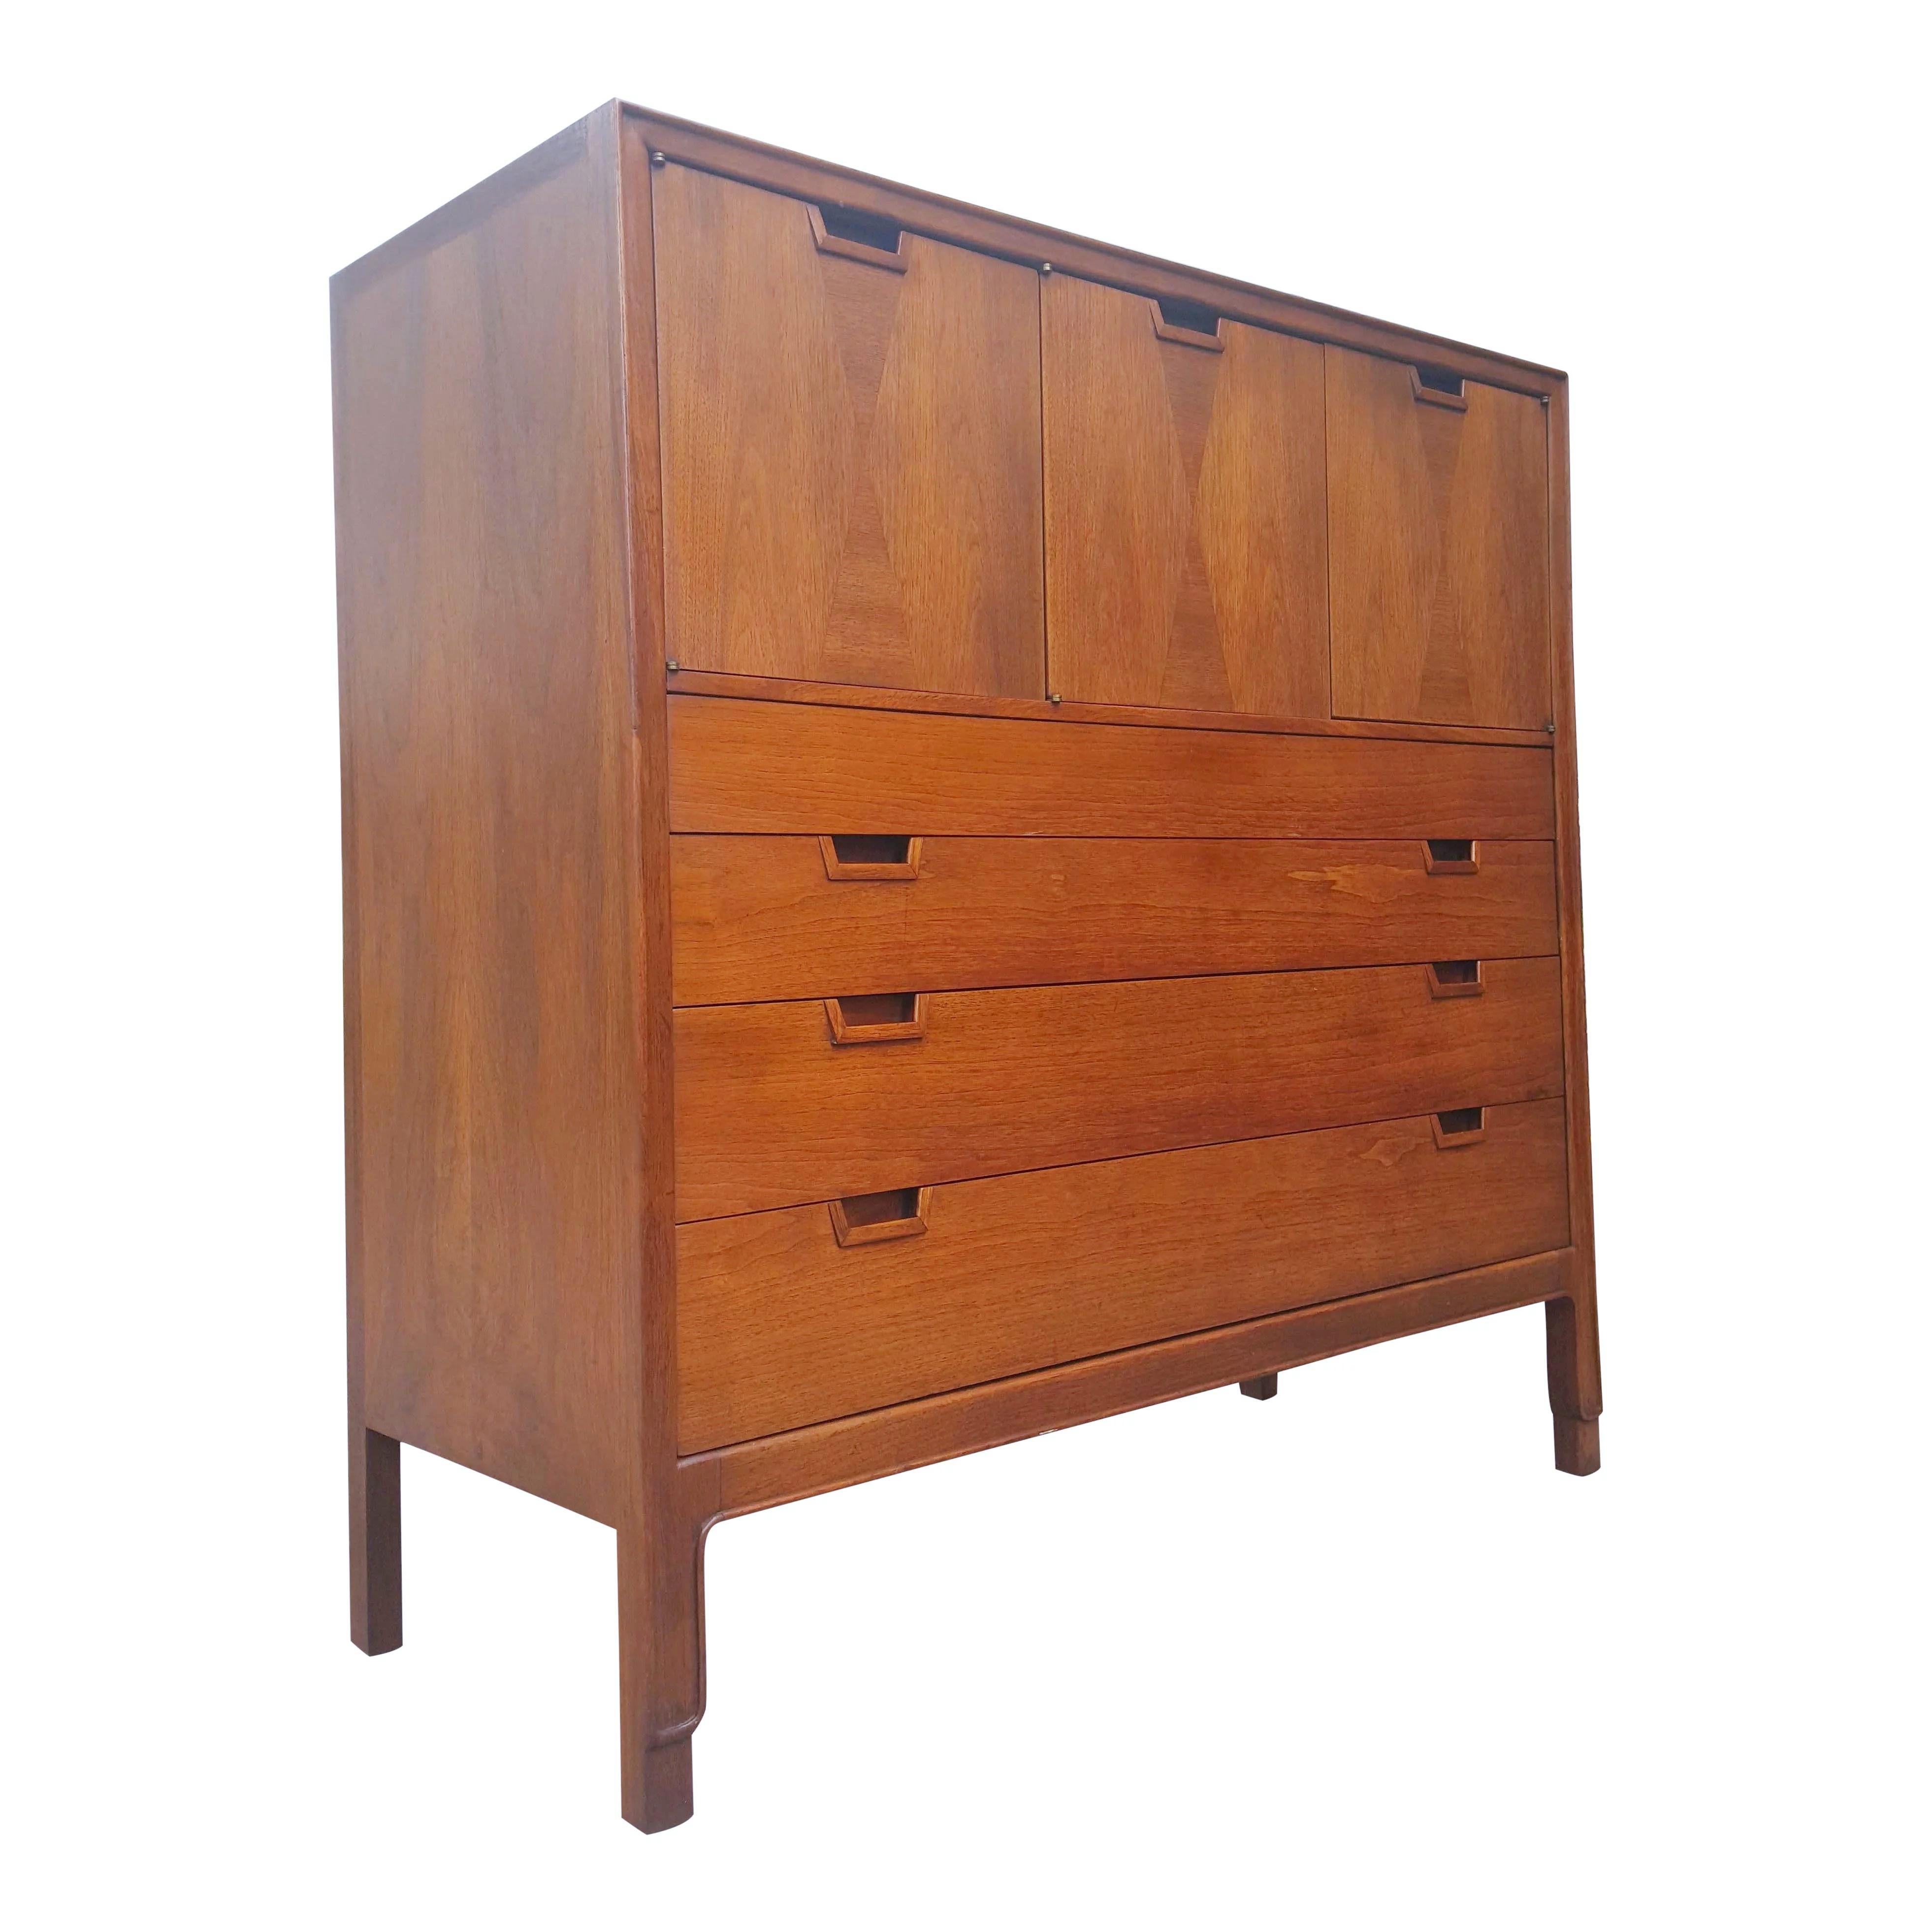 This highboy gentleman's chest by John Stuart for Janus collection is absolutely gorgeous! Classic 1960s design is accented by hourglass shaped alternating veneers. This is a highly sought after and collectible piece. Professionally restored it